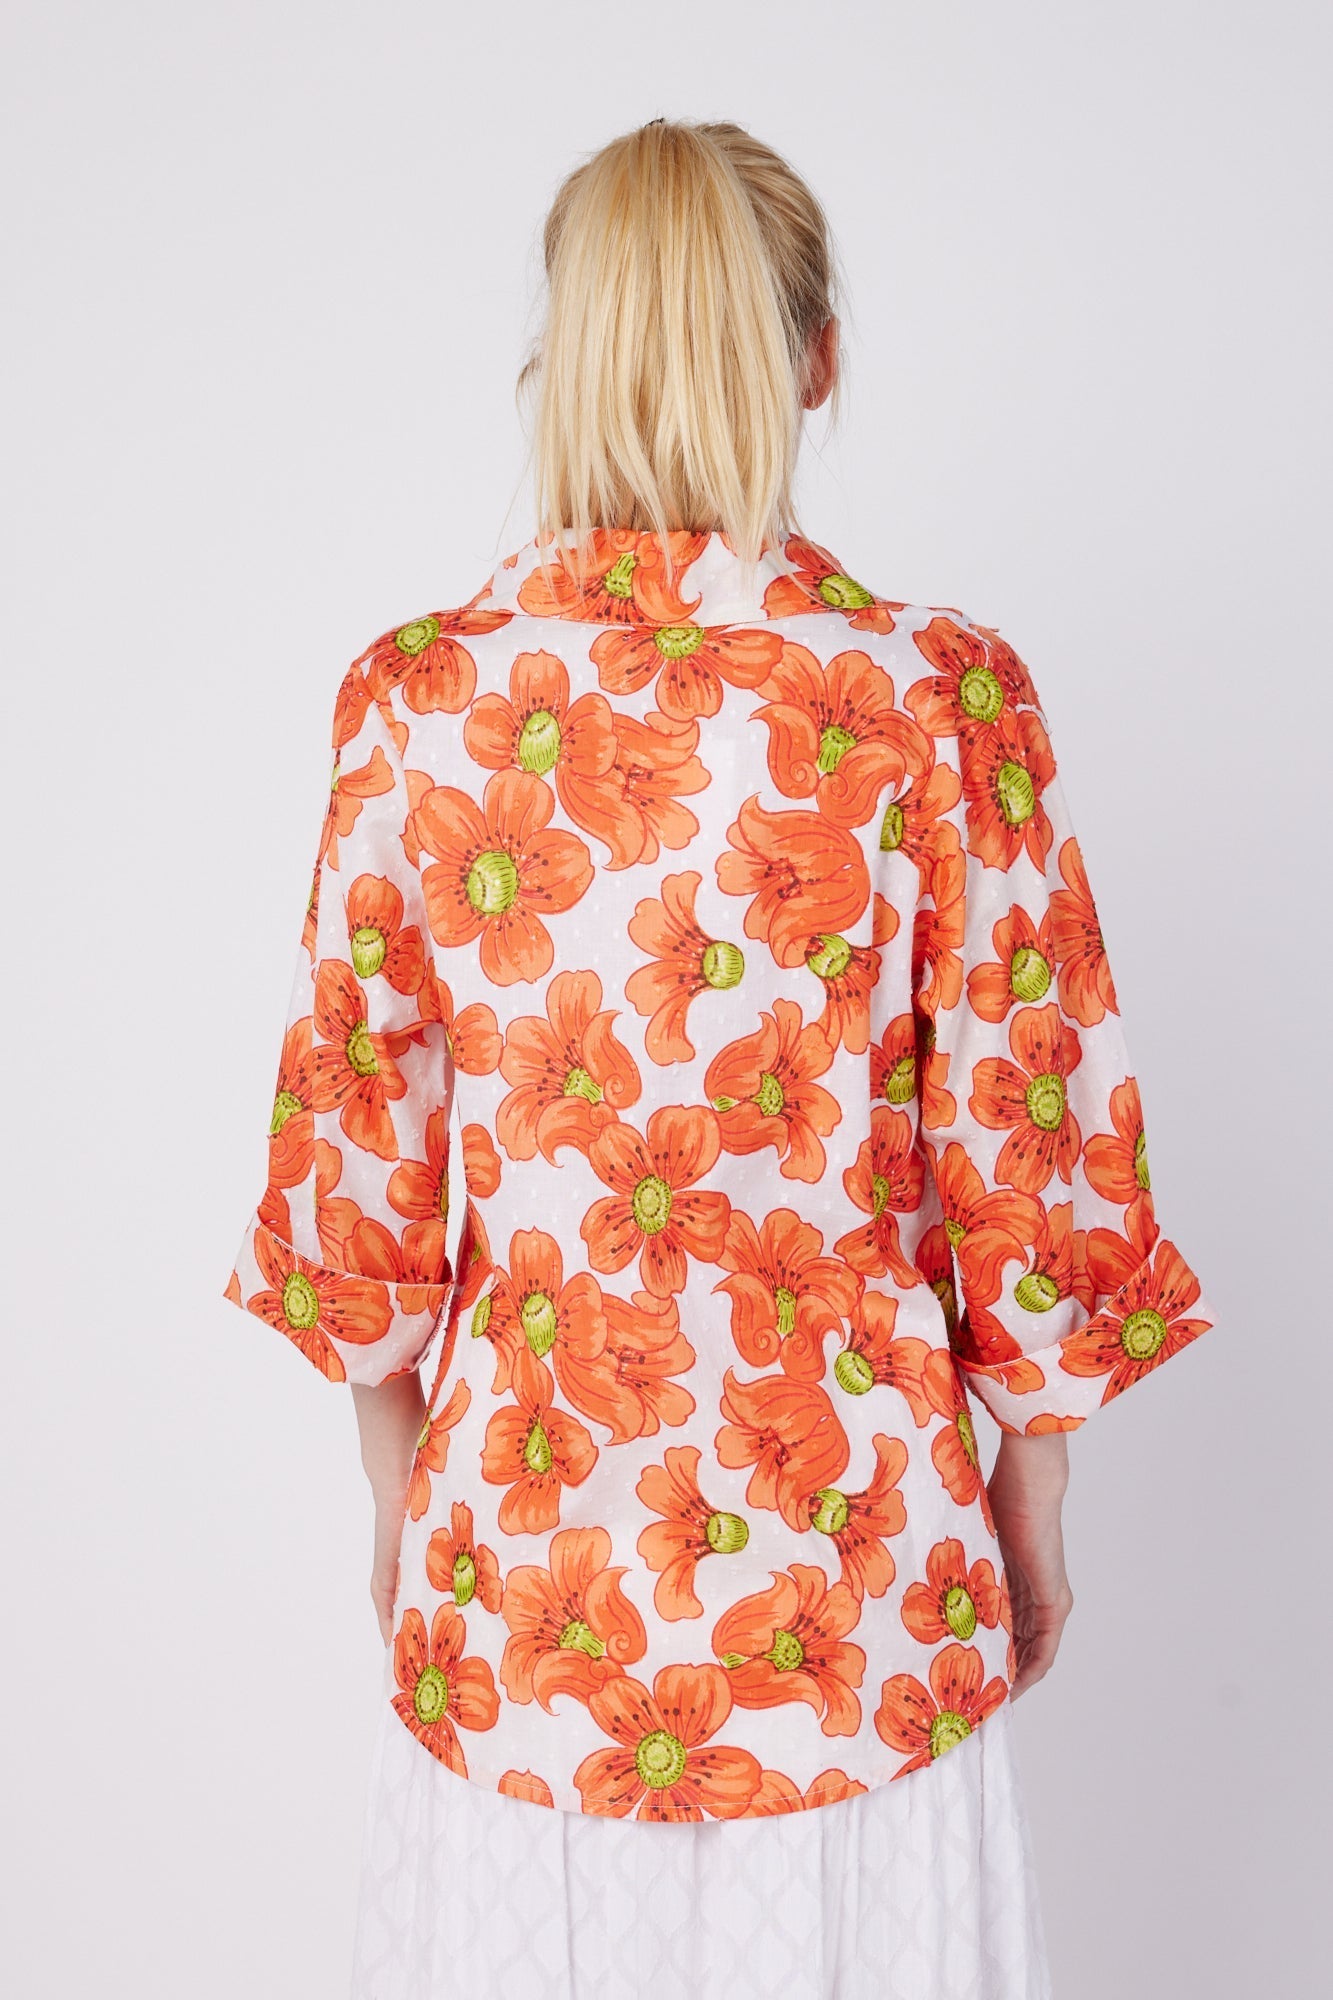 ModaPosa Rosalia 3/4 Sleeve Shirt with Collar in Poppy . Discover women's resort dresses and lifestyle clothing inspired by the Mediterranean. Free worldwide shipping available!